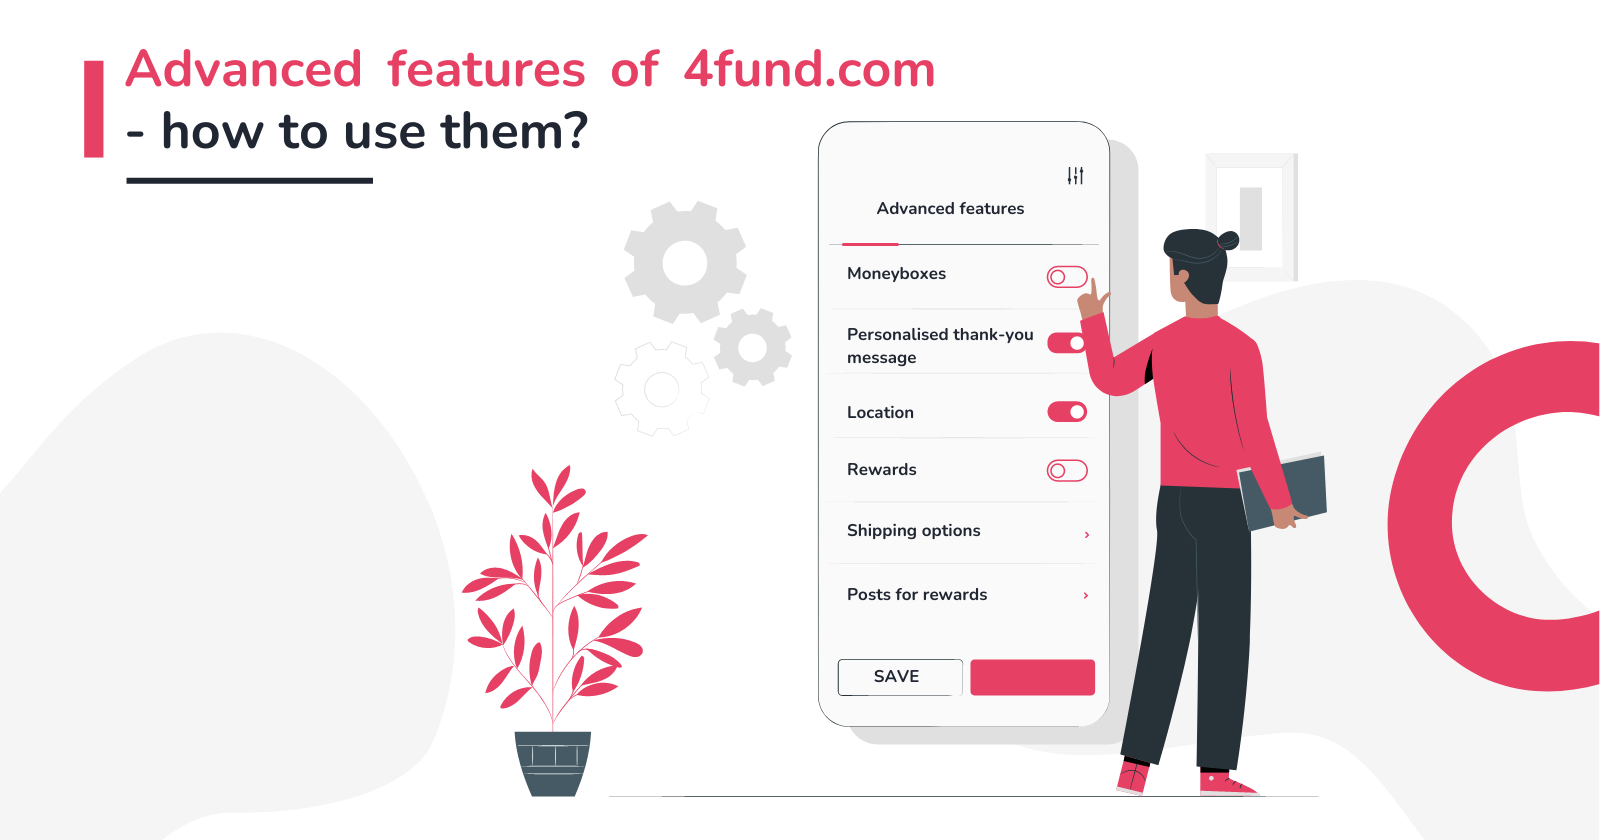 Advanced features of 4fund.com - how to use them?